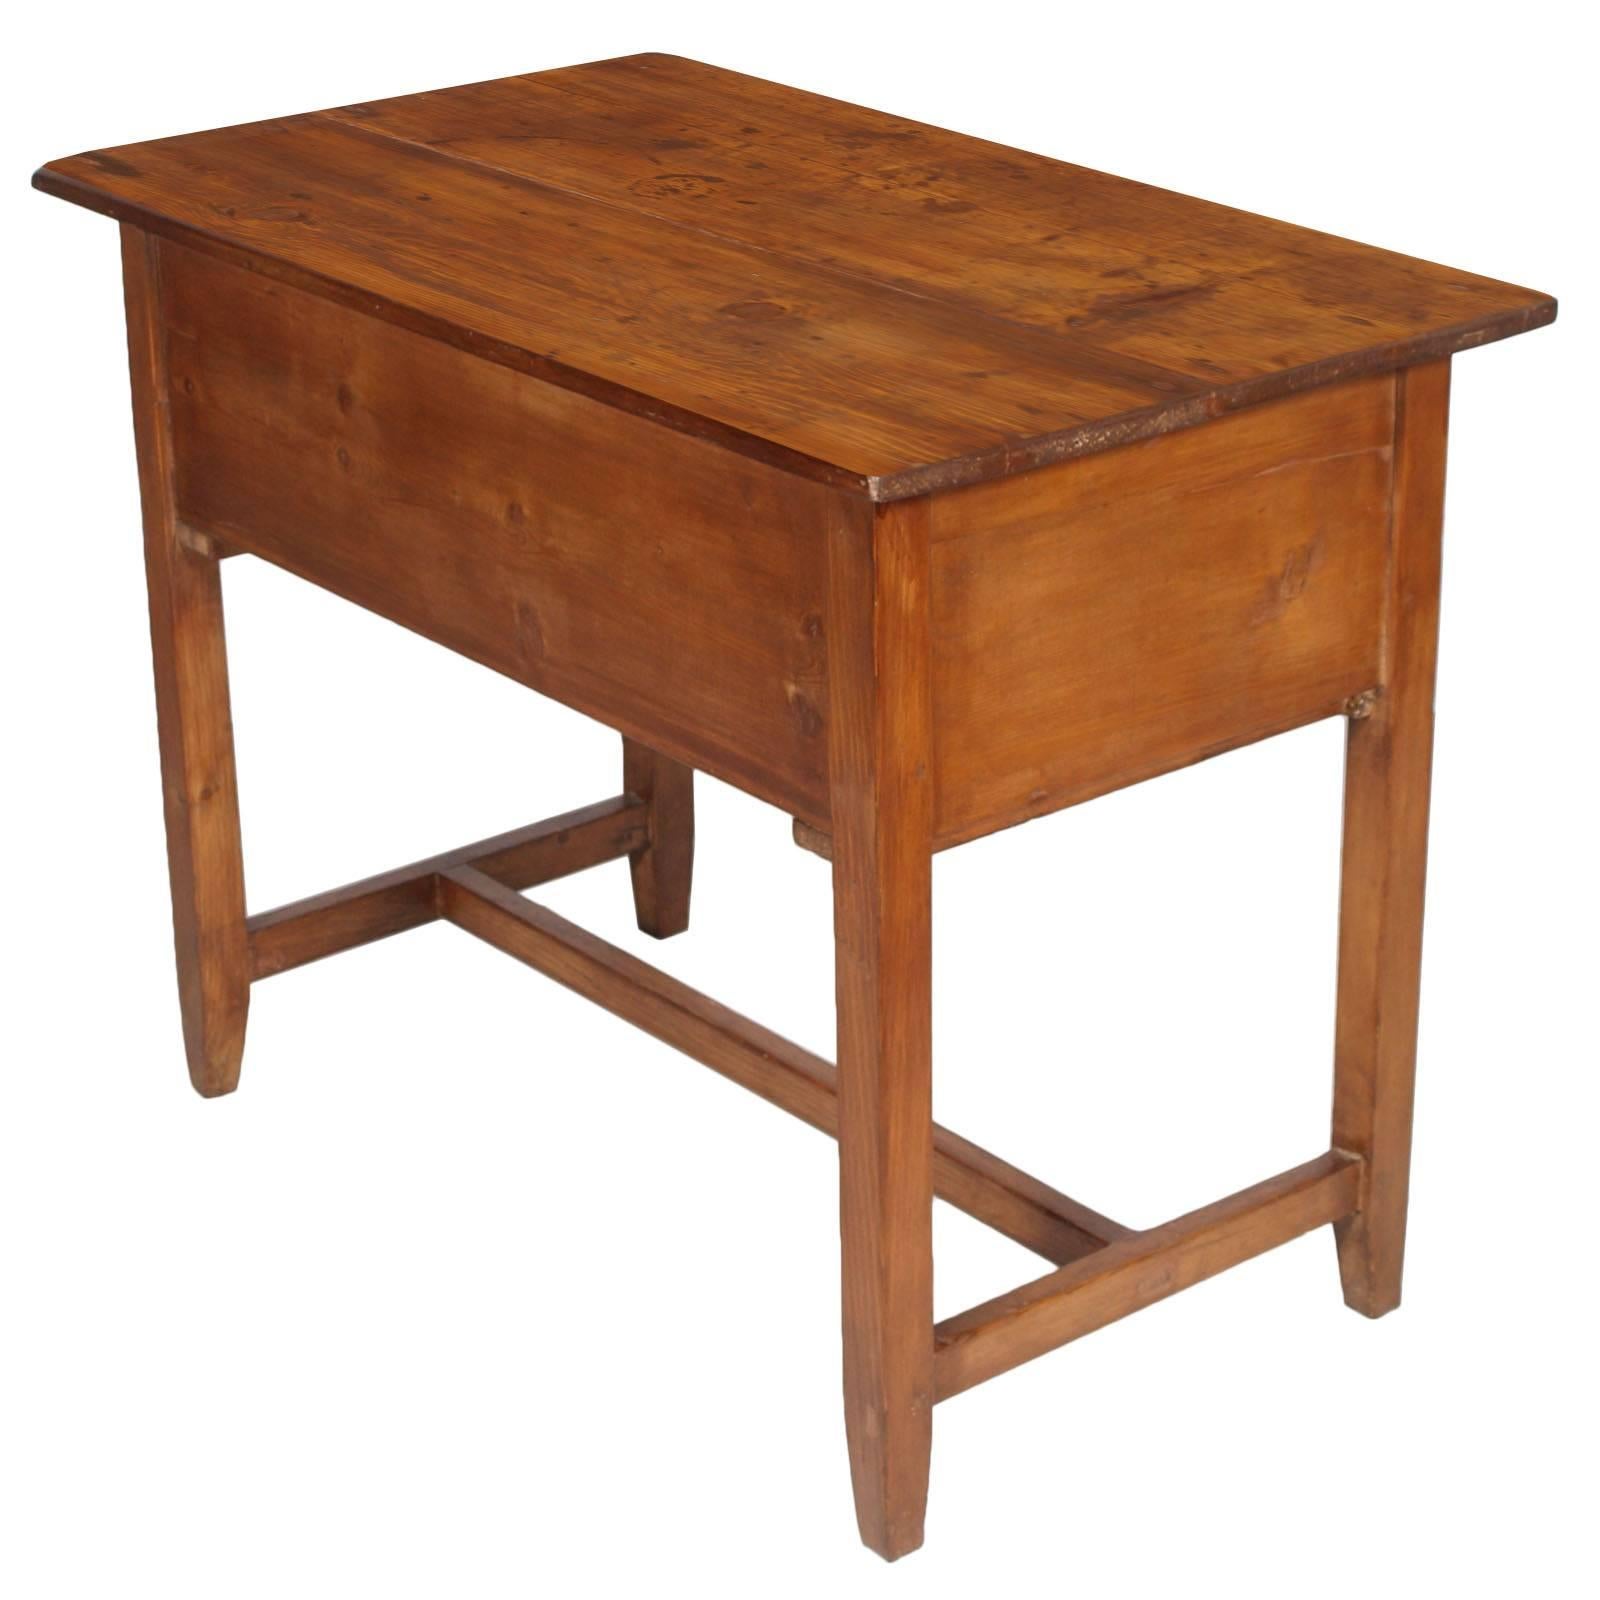 Italian Antique Country Farm Work Table Desk in Solid Pine Rustic, Restored Wax Polished